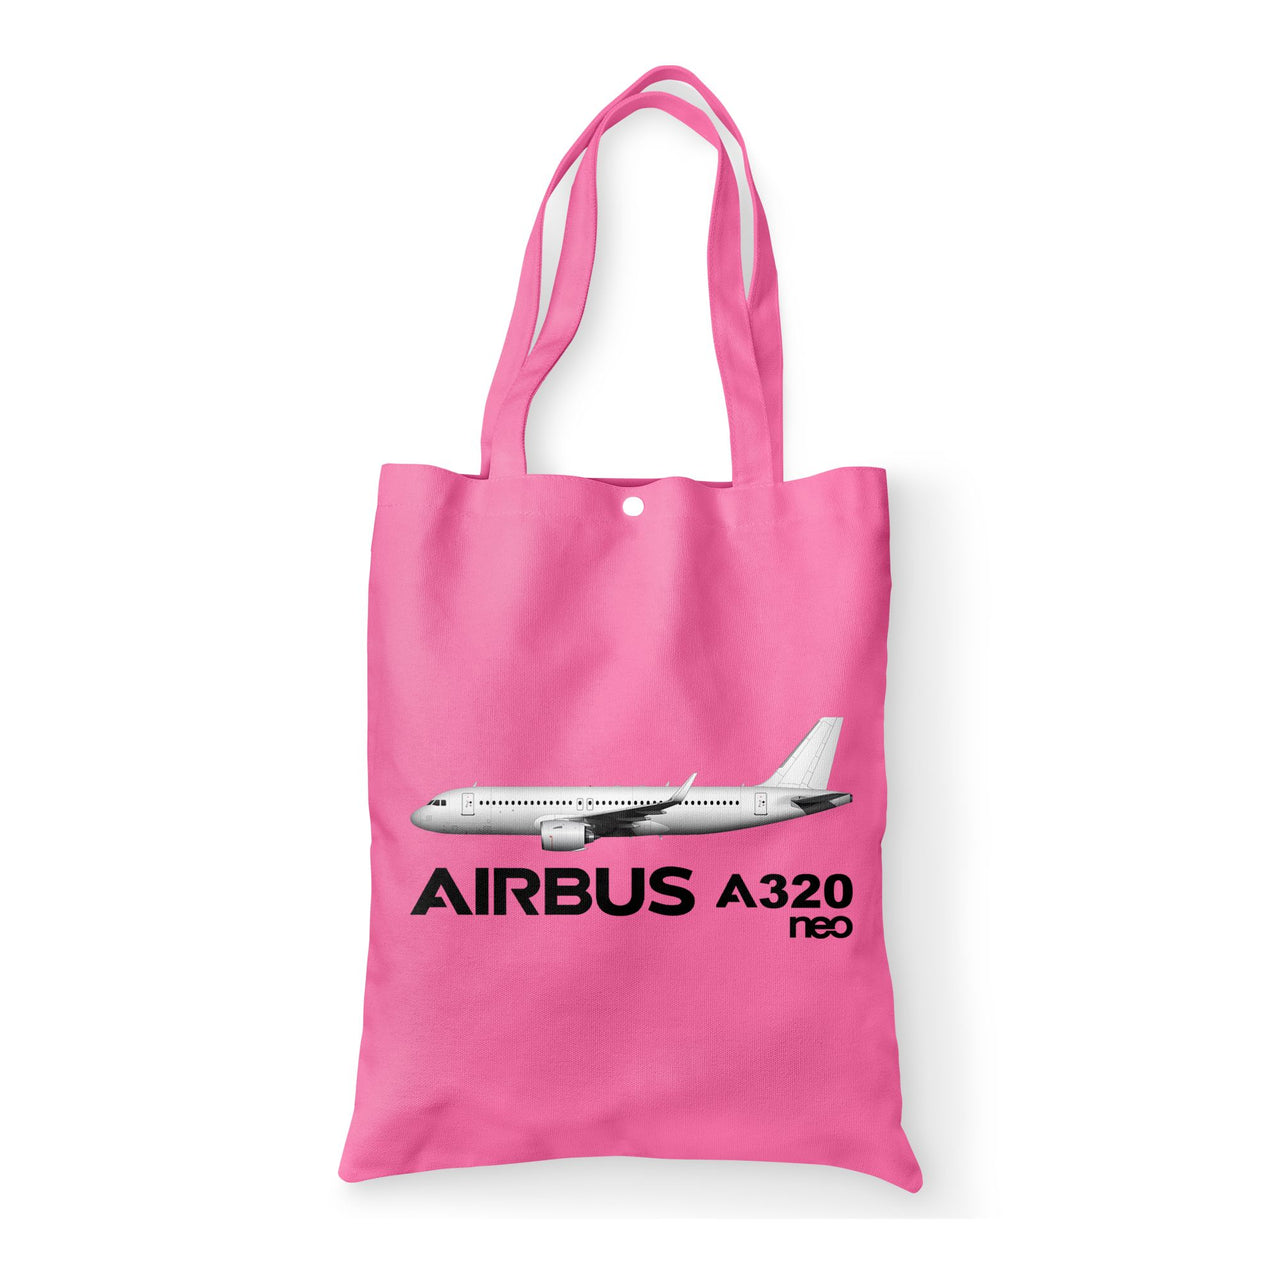 The Airbus A320Neo Designed Tote Bags